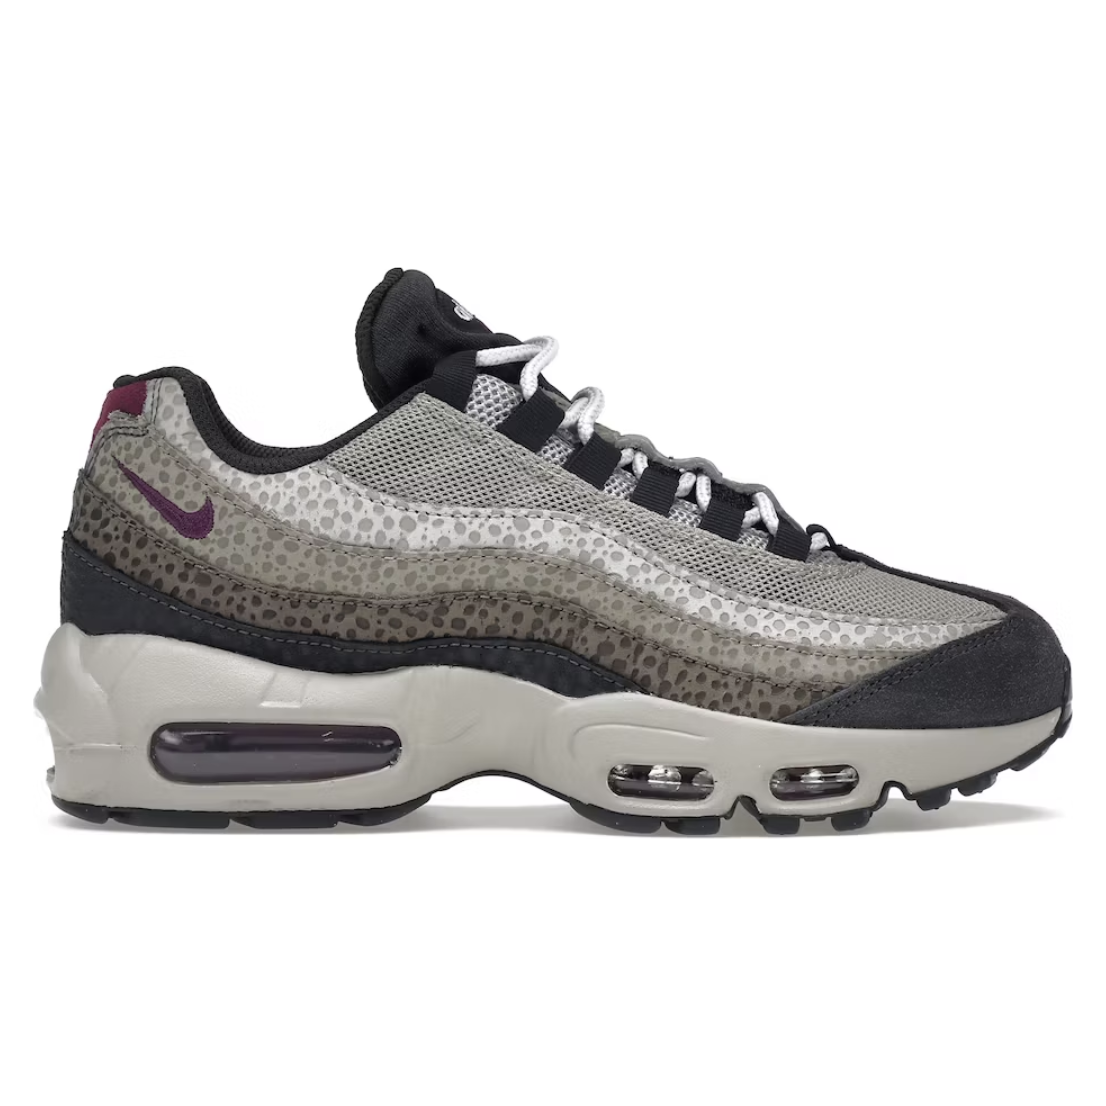 Nike Air Max 95 Viotech Anthracite (Women's) by Nike from £100.00